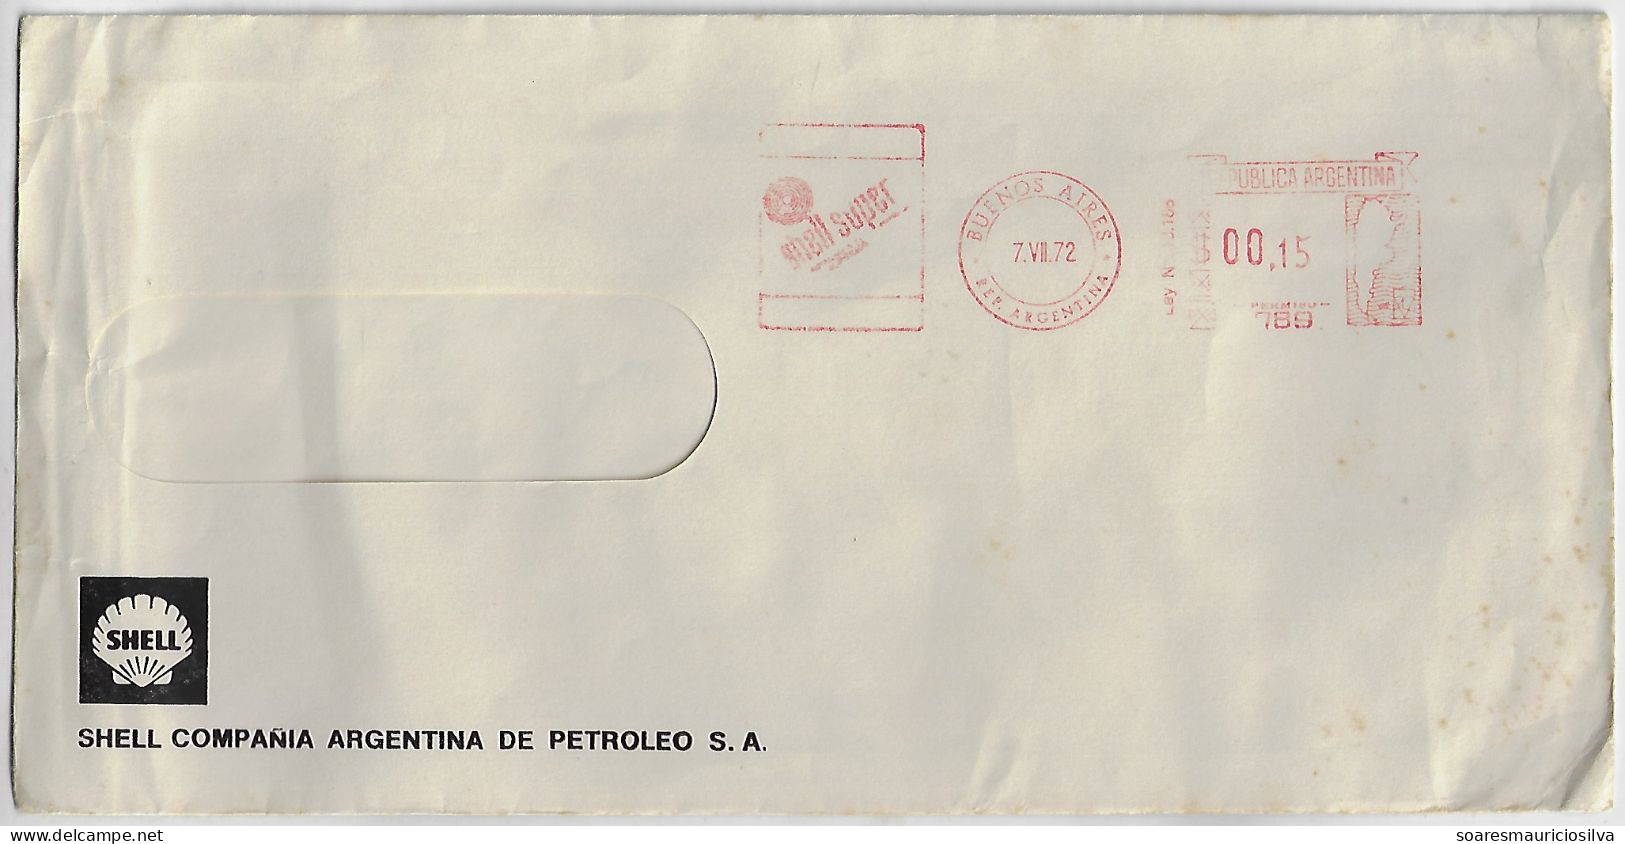 Argentina 1972 Commercial Cover From Buenos Aires Meter Stamp Hasler F66/F88 Slogan Shell Super Gas Gasoline Fuel Oil - Gas